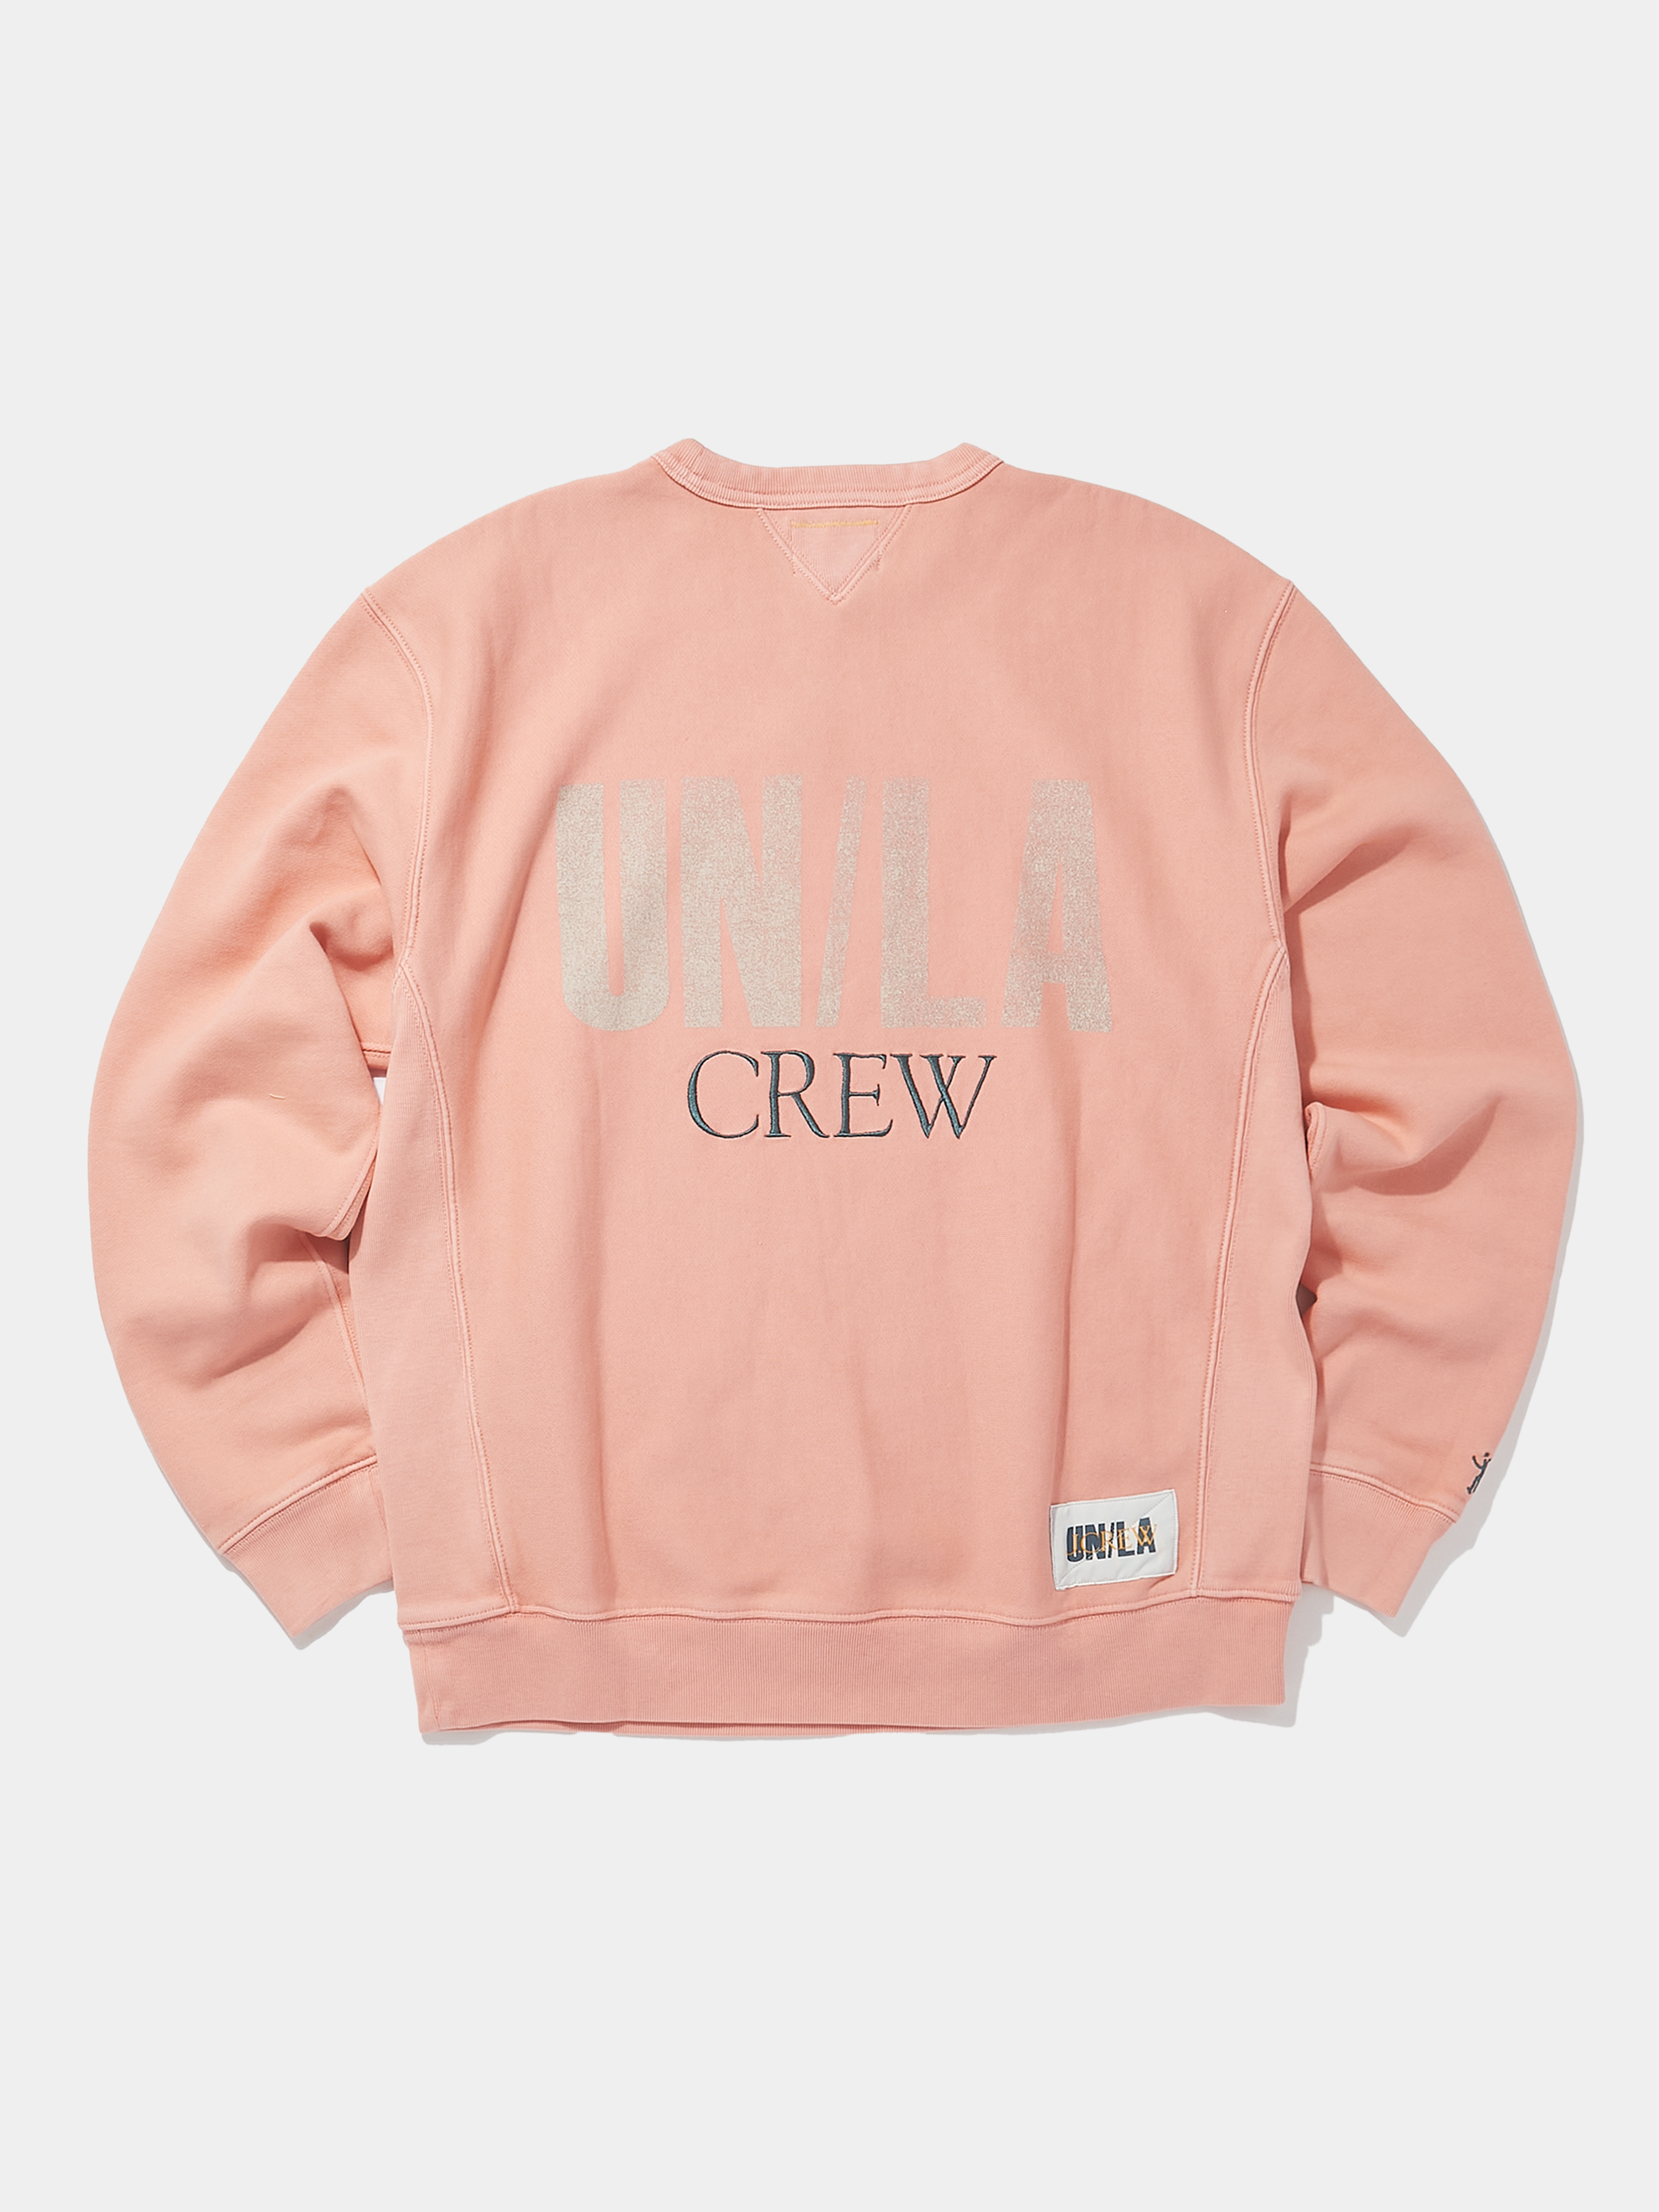 Imagery from Union LA & J.Crew's collaborative clothing collection that releases in September 2023